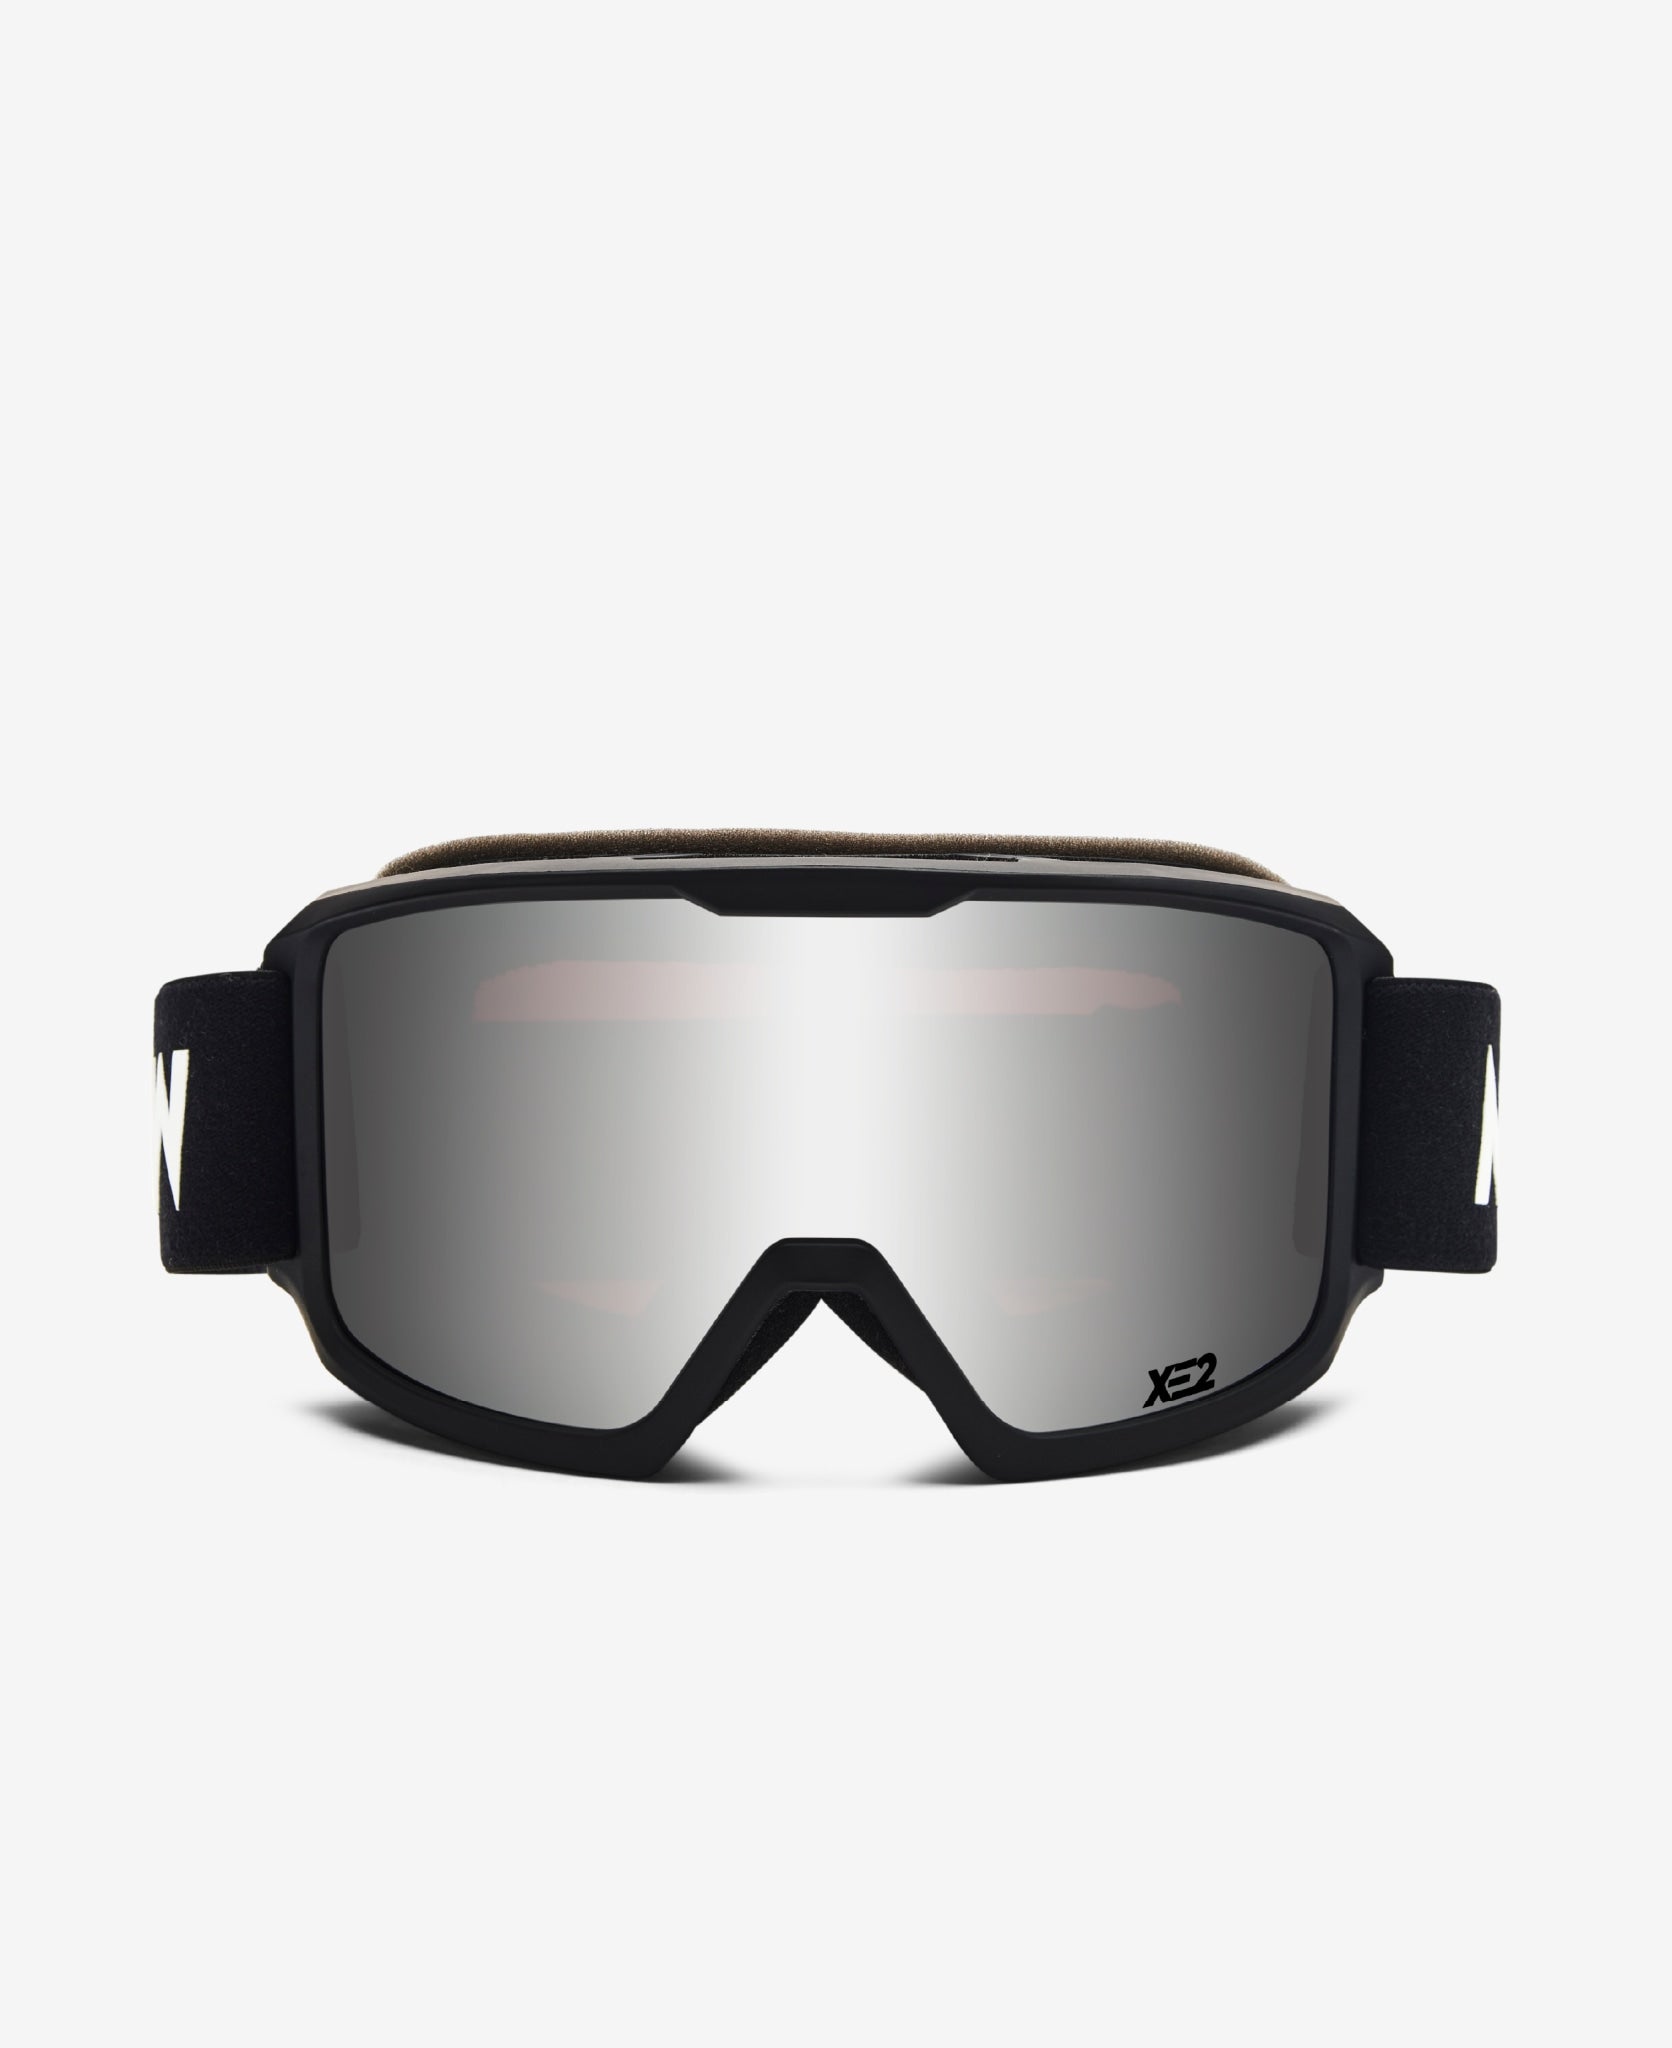 Snow Goggles | High Contrast, Magnetic & Photochromic | MessyWeekend